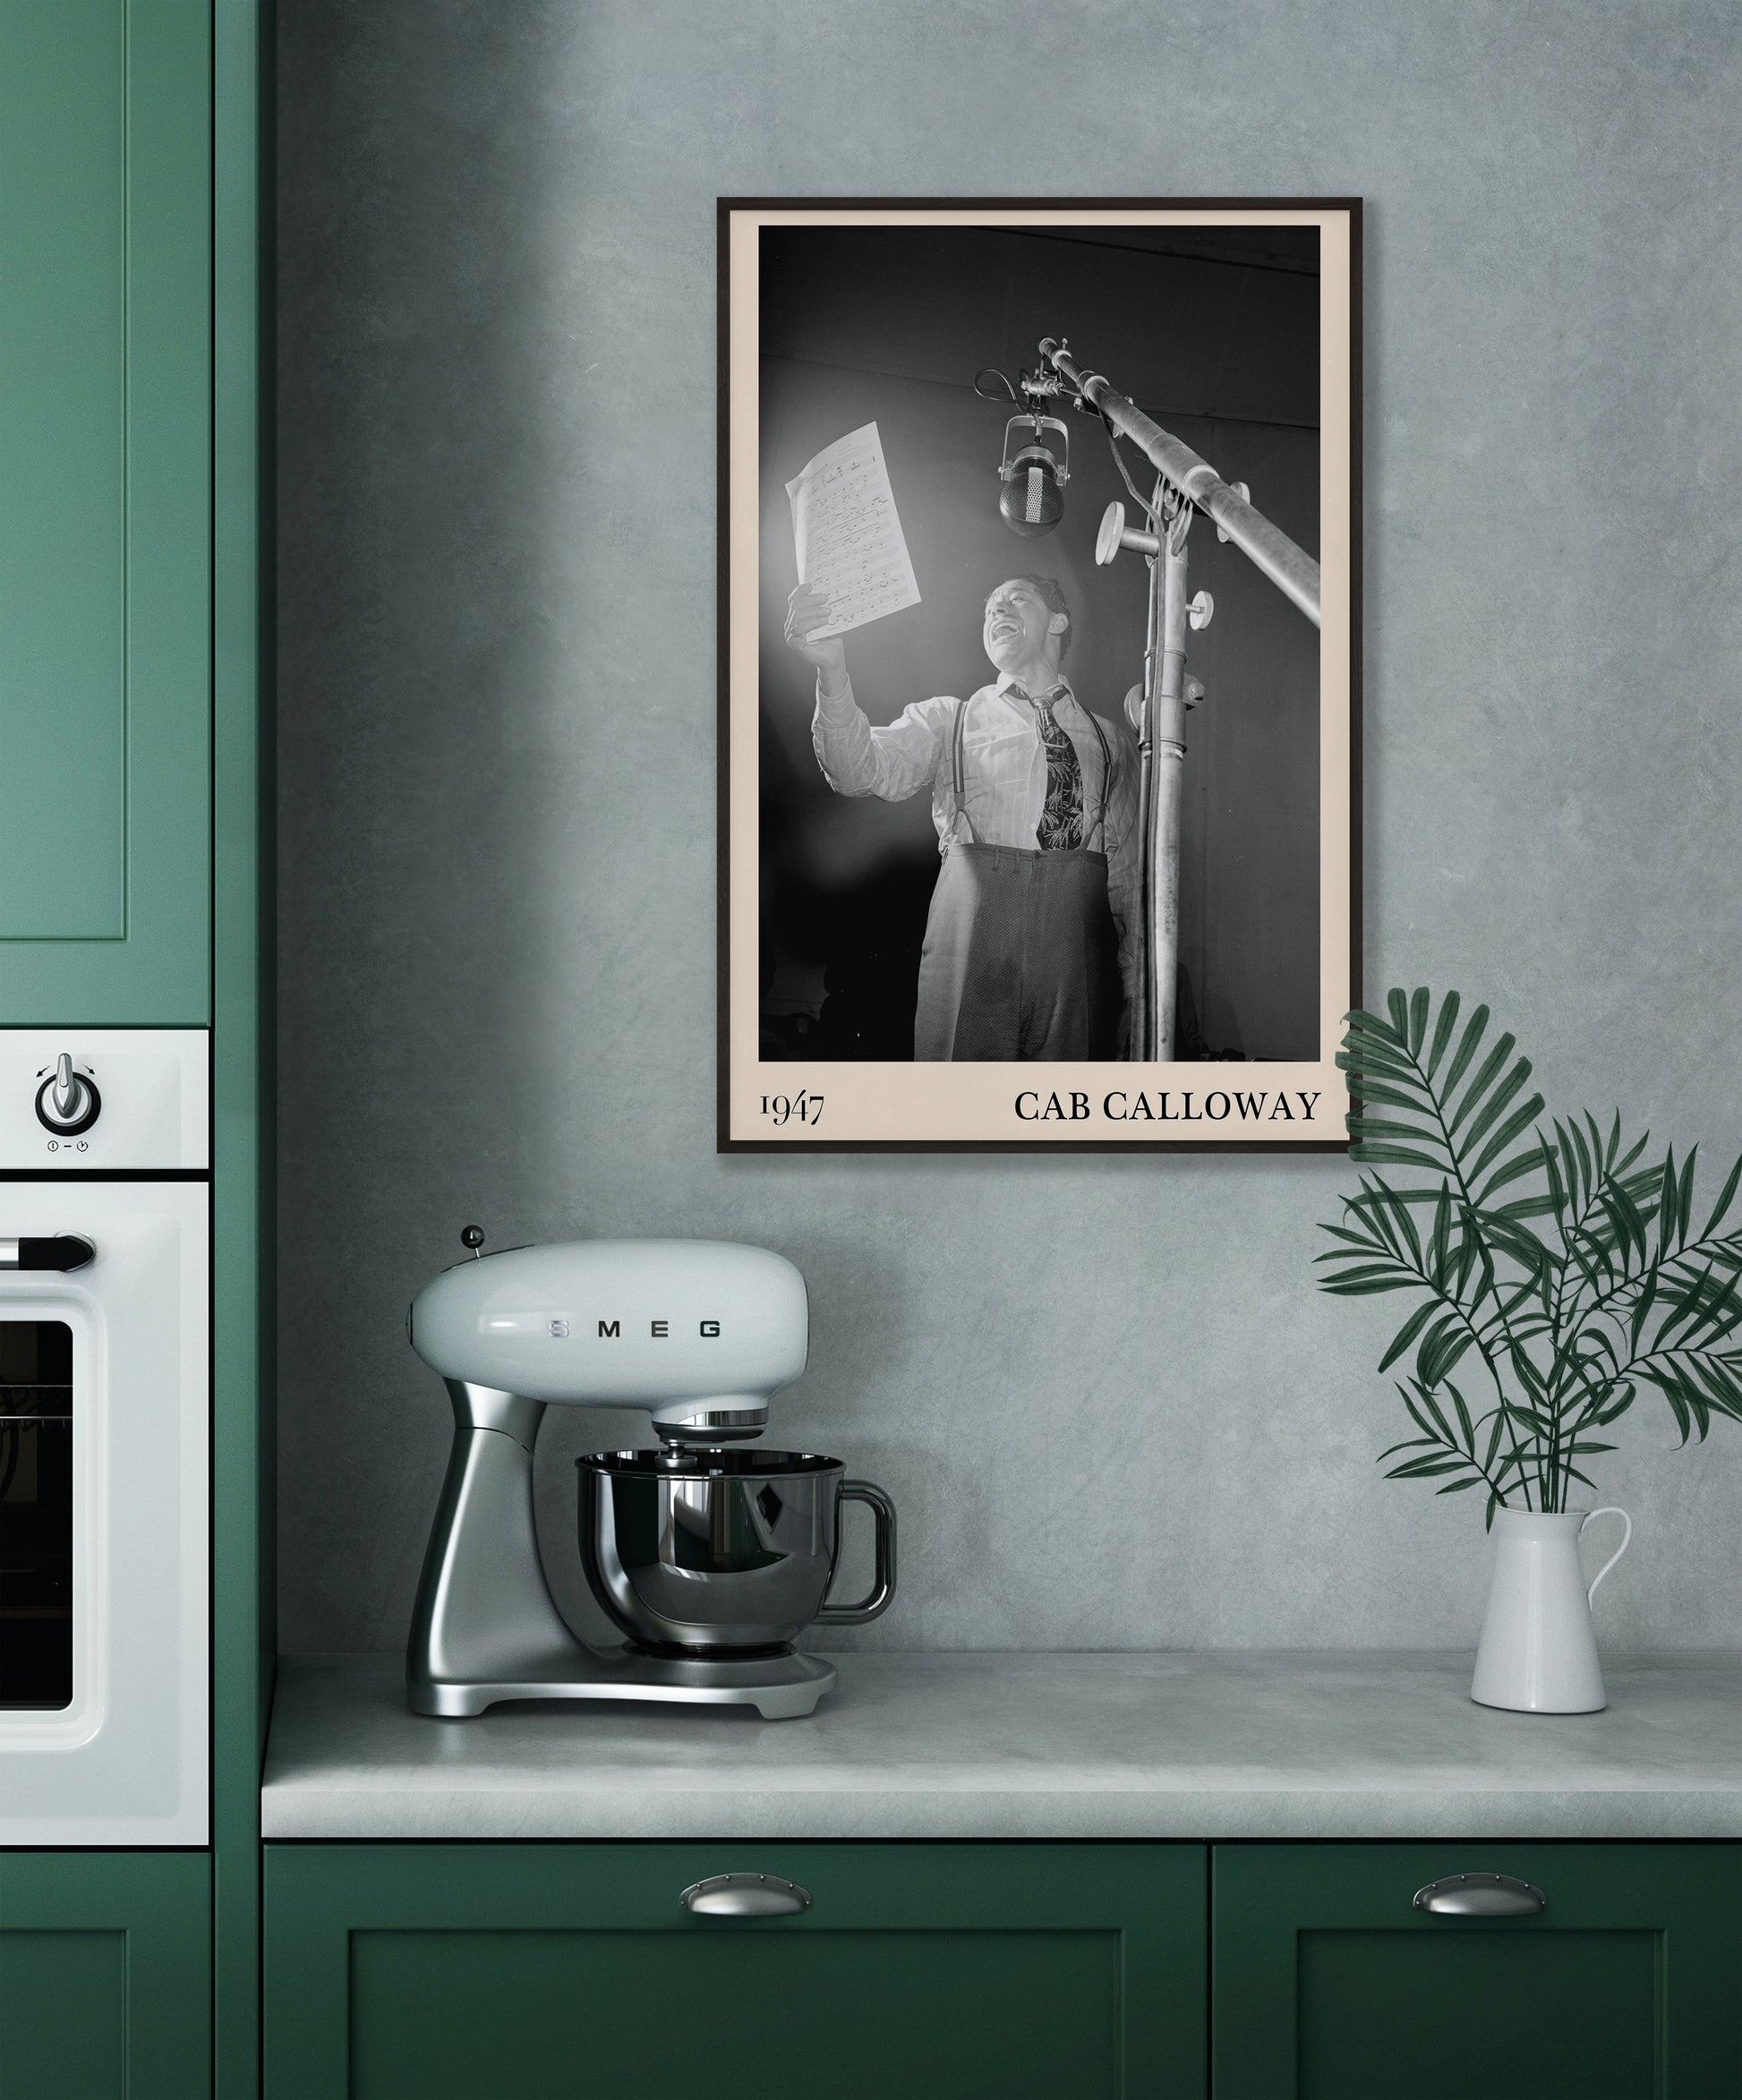 Cool 1947 photo of Cab Calloway crafted into a framed music poster, hanging on kitchen wall